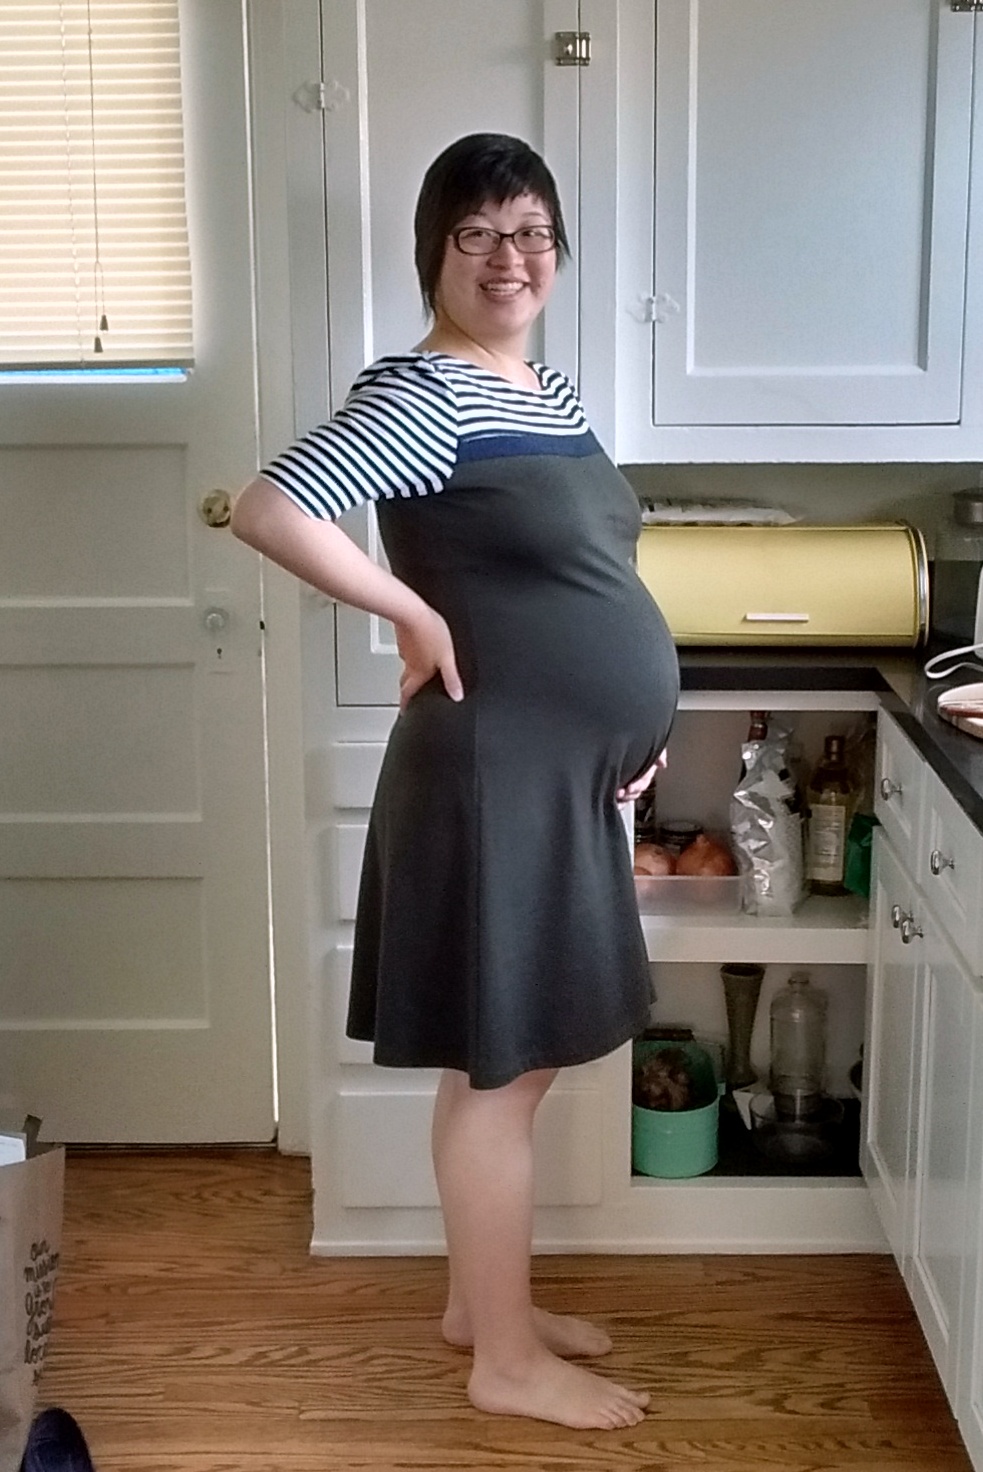 Lisa in her kitchen, 36 weeks pregnant